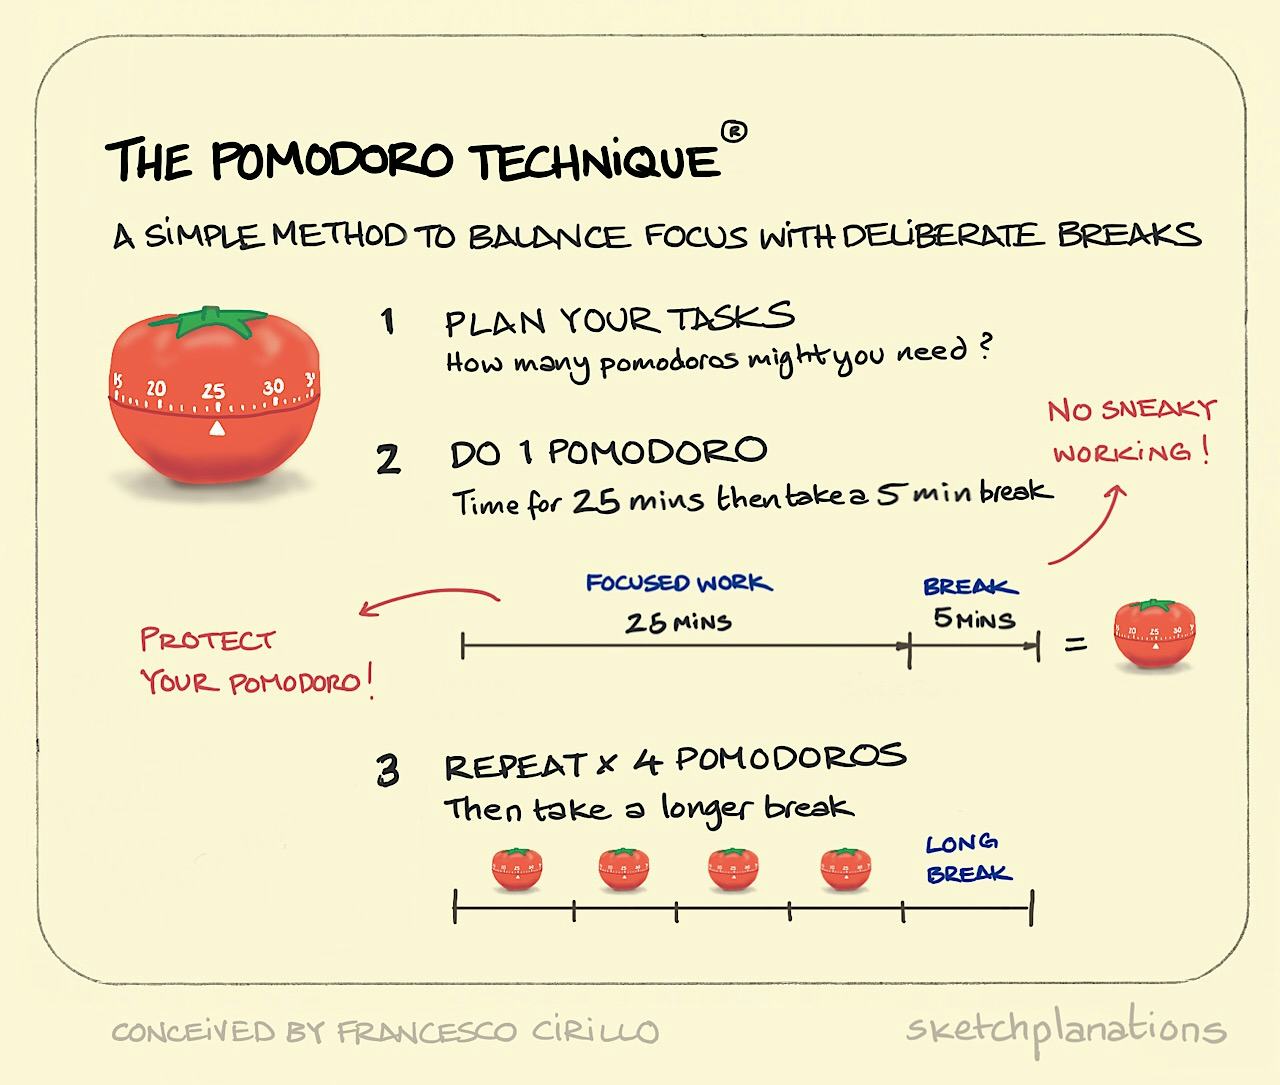 The Pomodoro technique (TM) explained in 3 steps of planning, doing 1 pomodoro, and repeating — includes a tomato timer